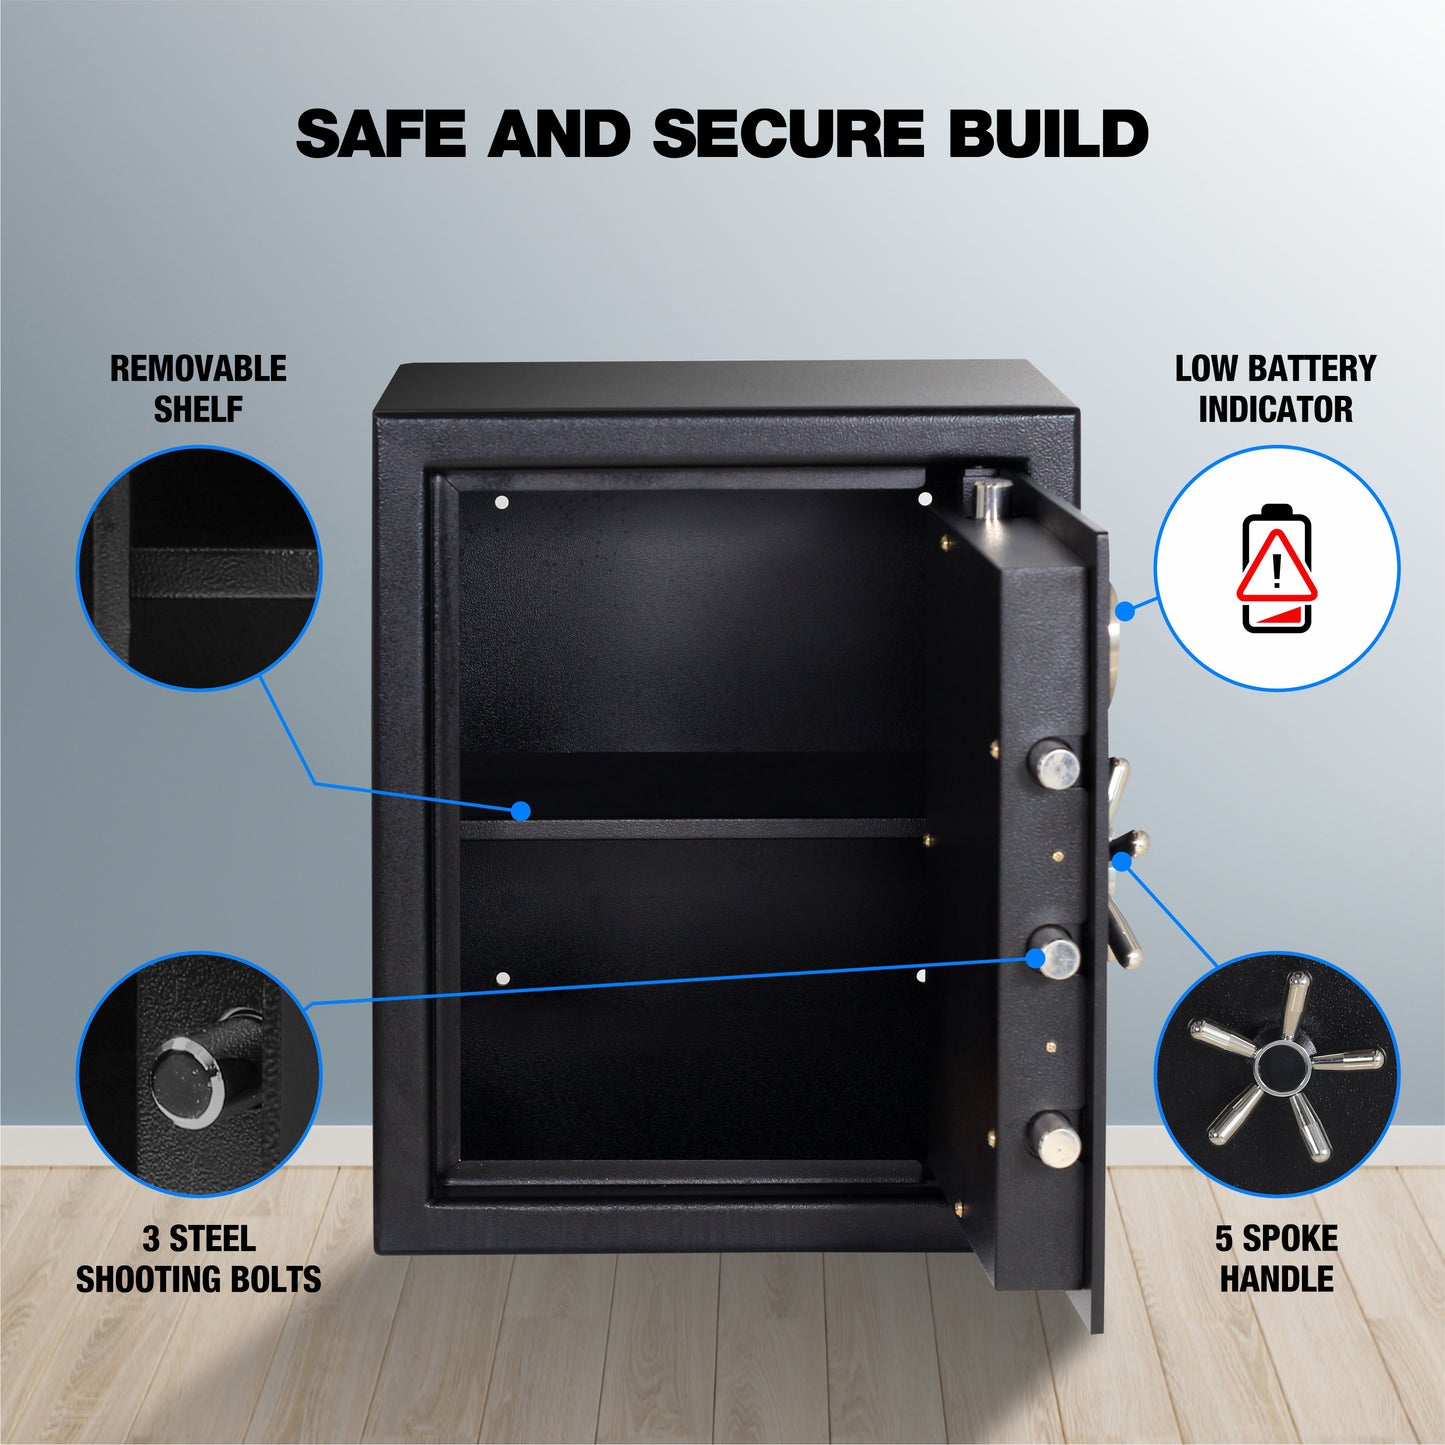 Ozone Anti-burglary Safe for Home & Business | 2-way Access | Password & Emergency Key (78 Ltrs.)